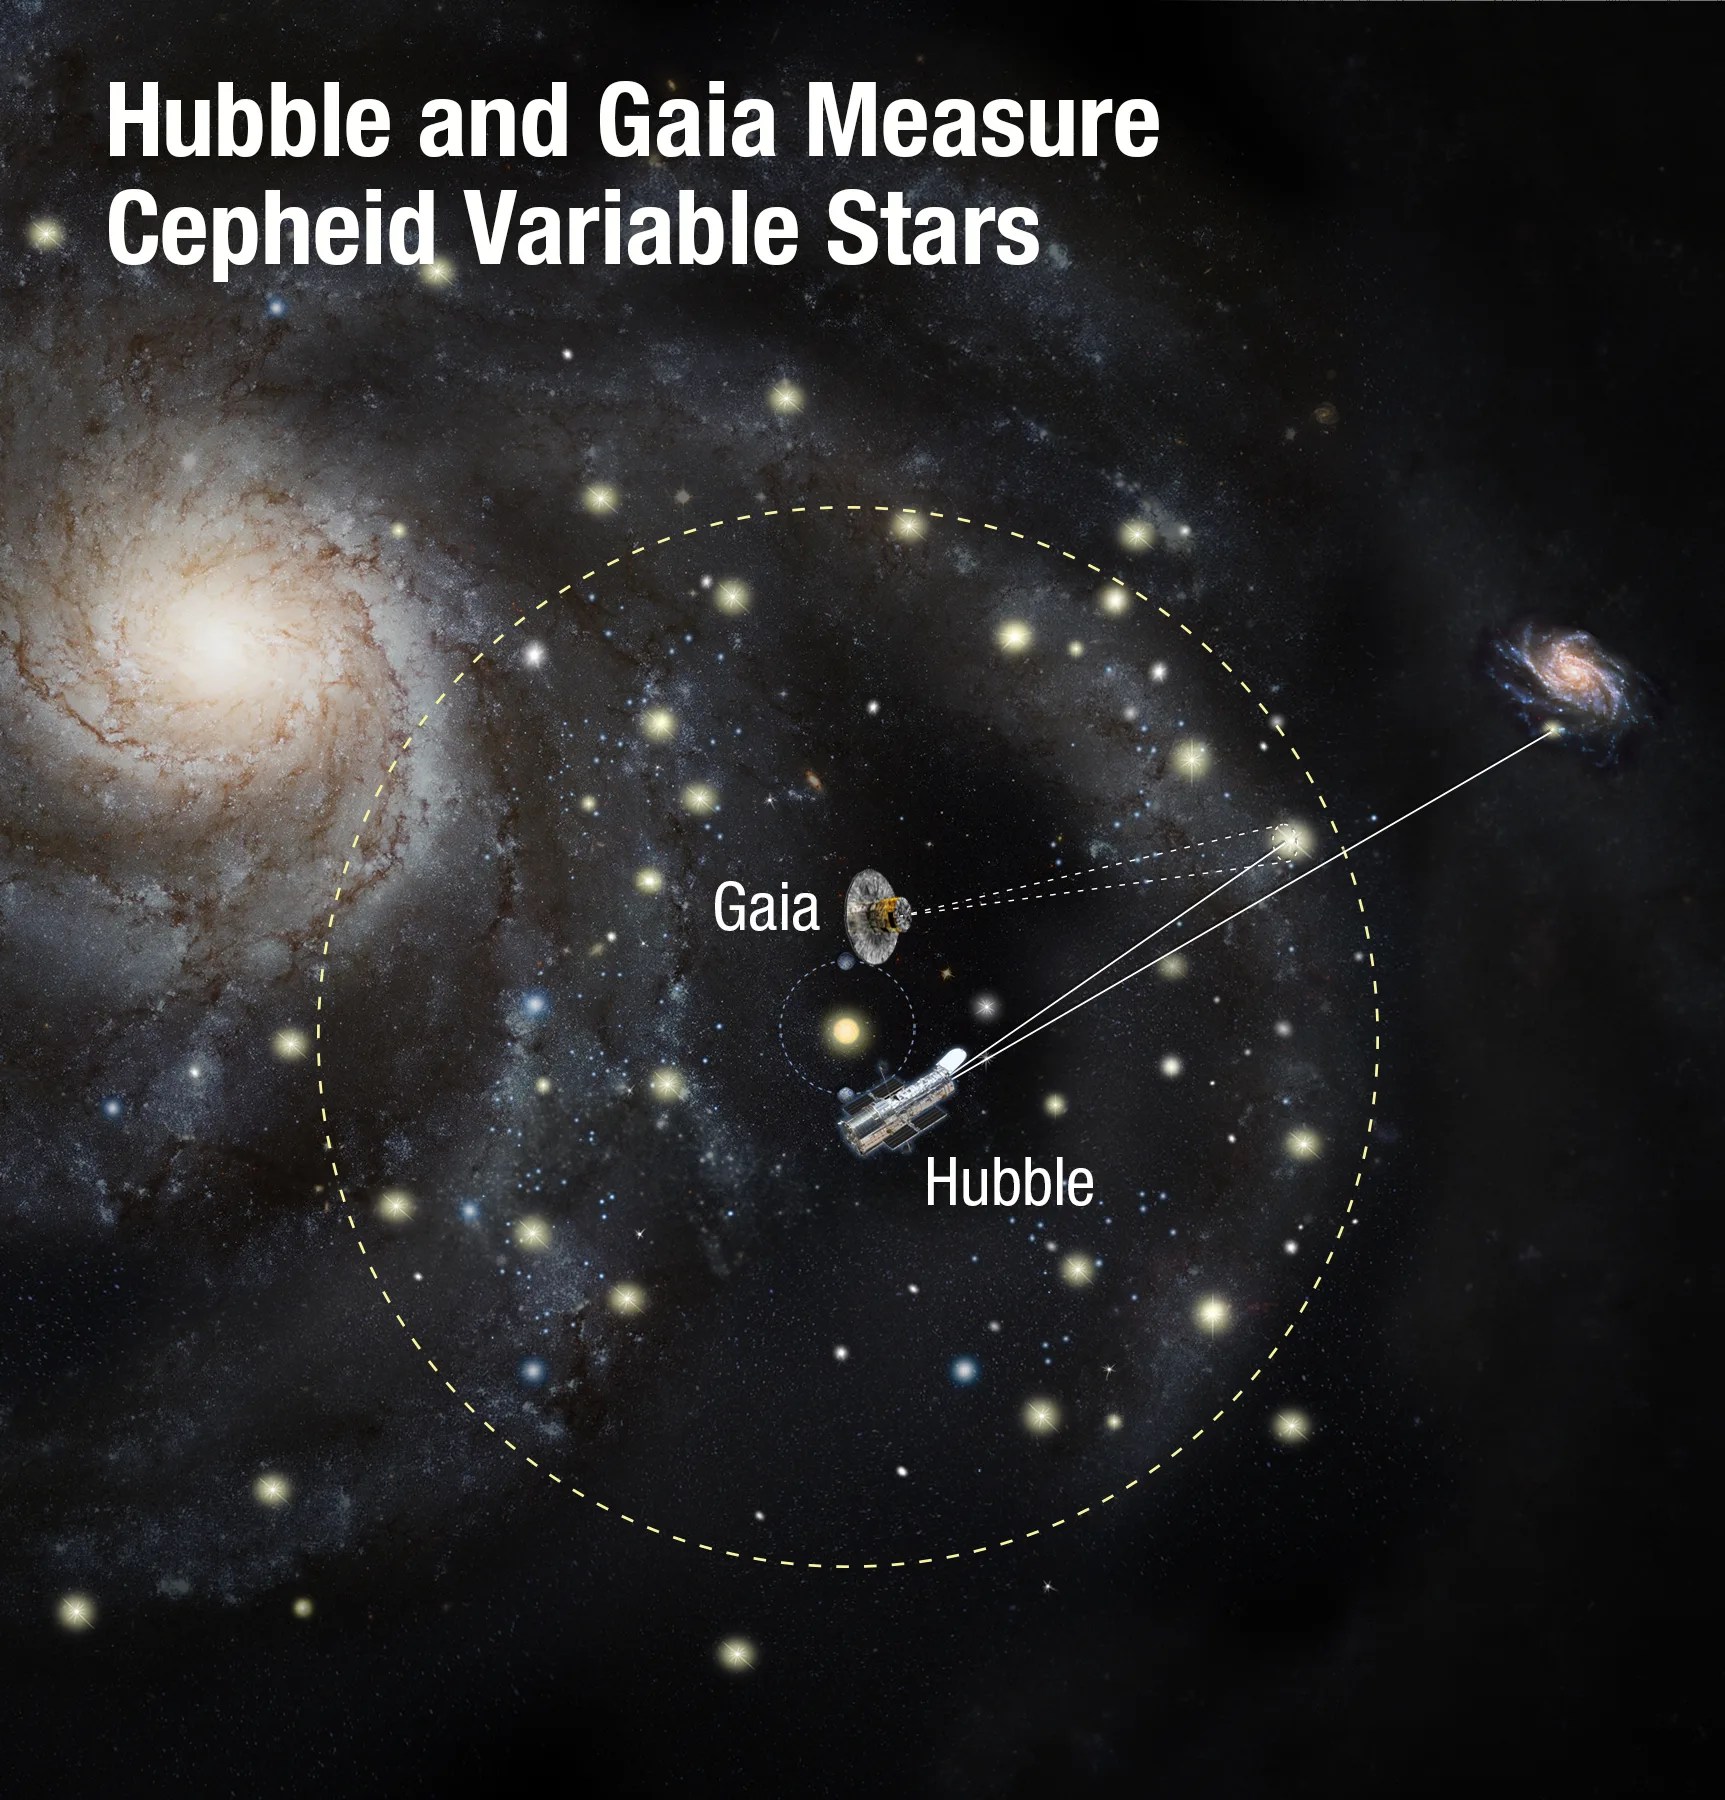 graphic showing space telescopes and galaxies